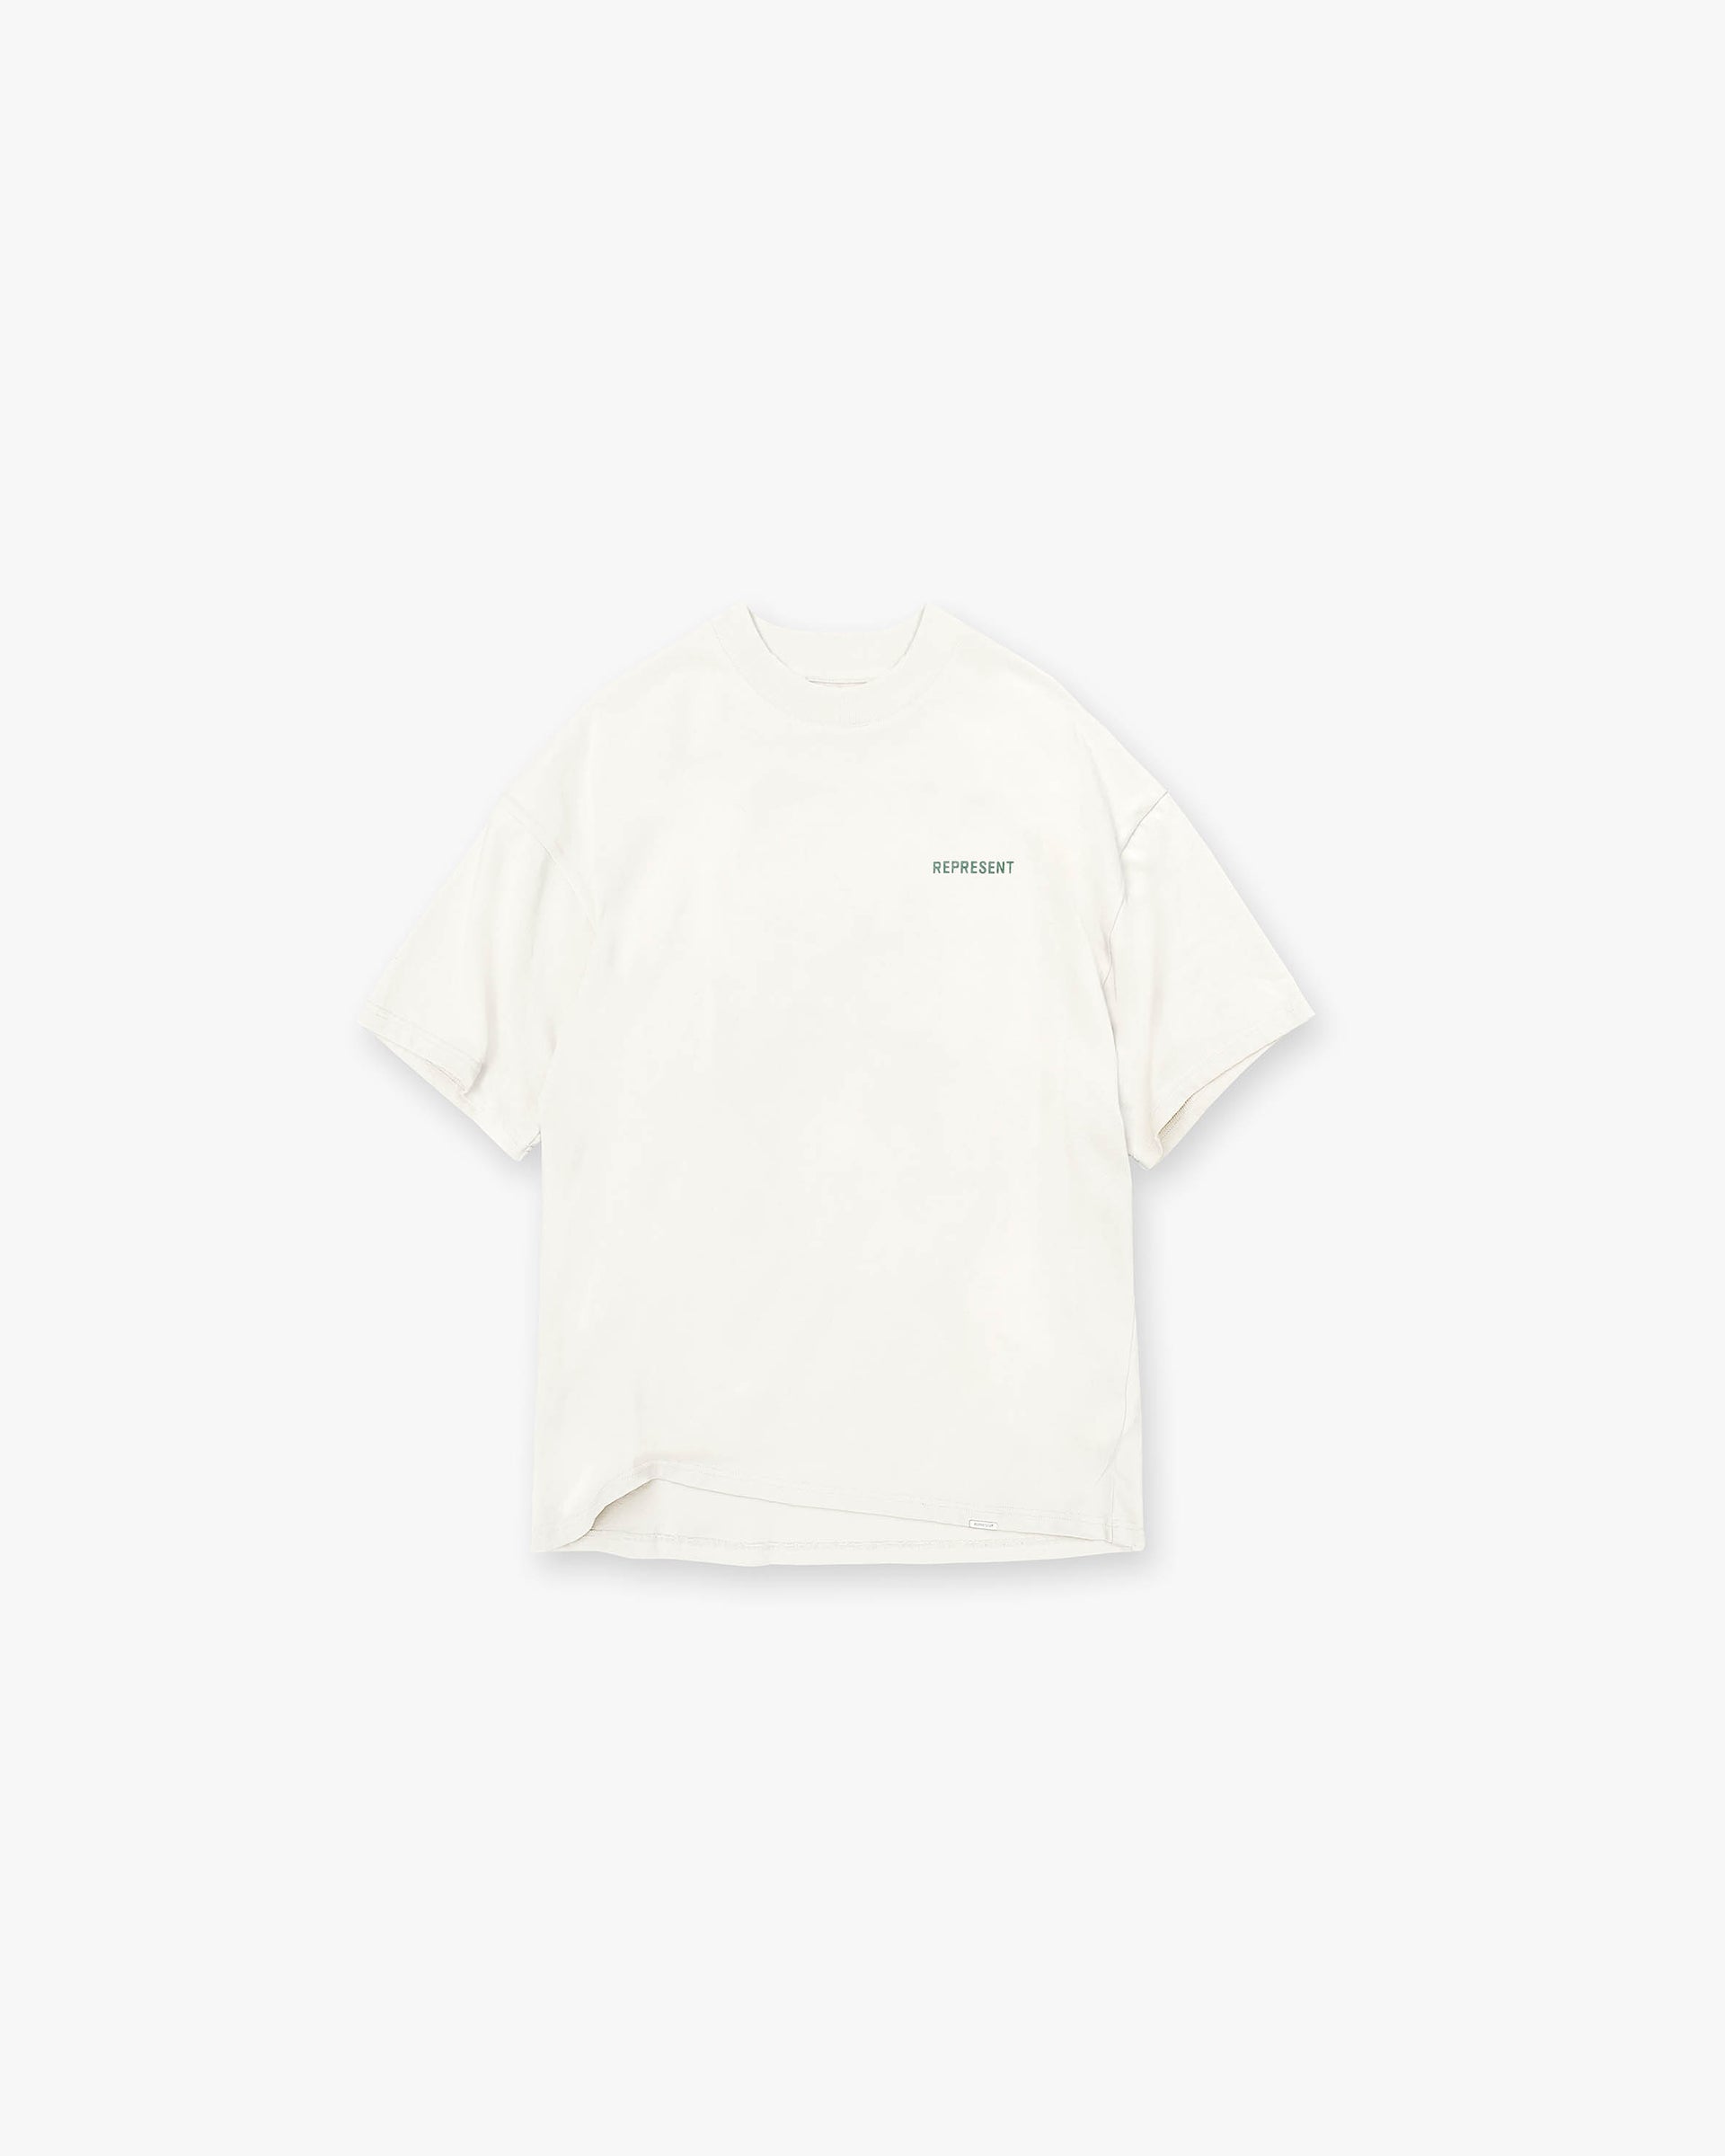 Represent x StockX Deconstructed T-Shirt | Flat White T-Shirts Exclusive | Represent Clo